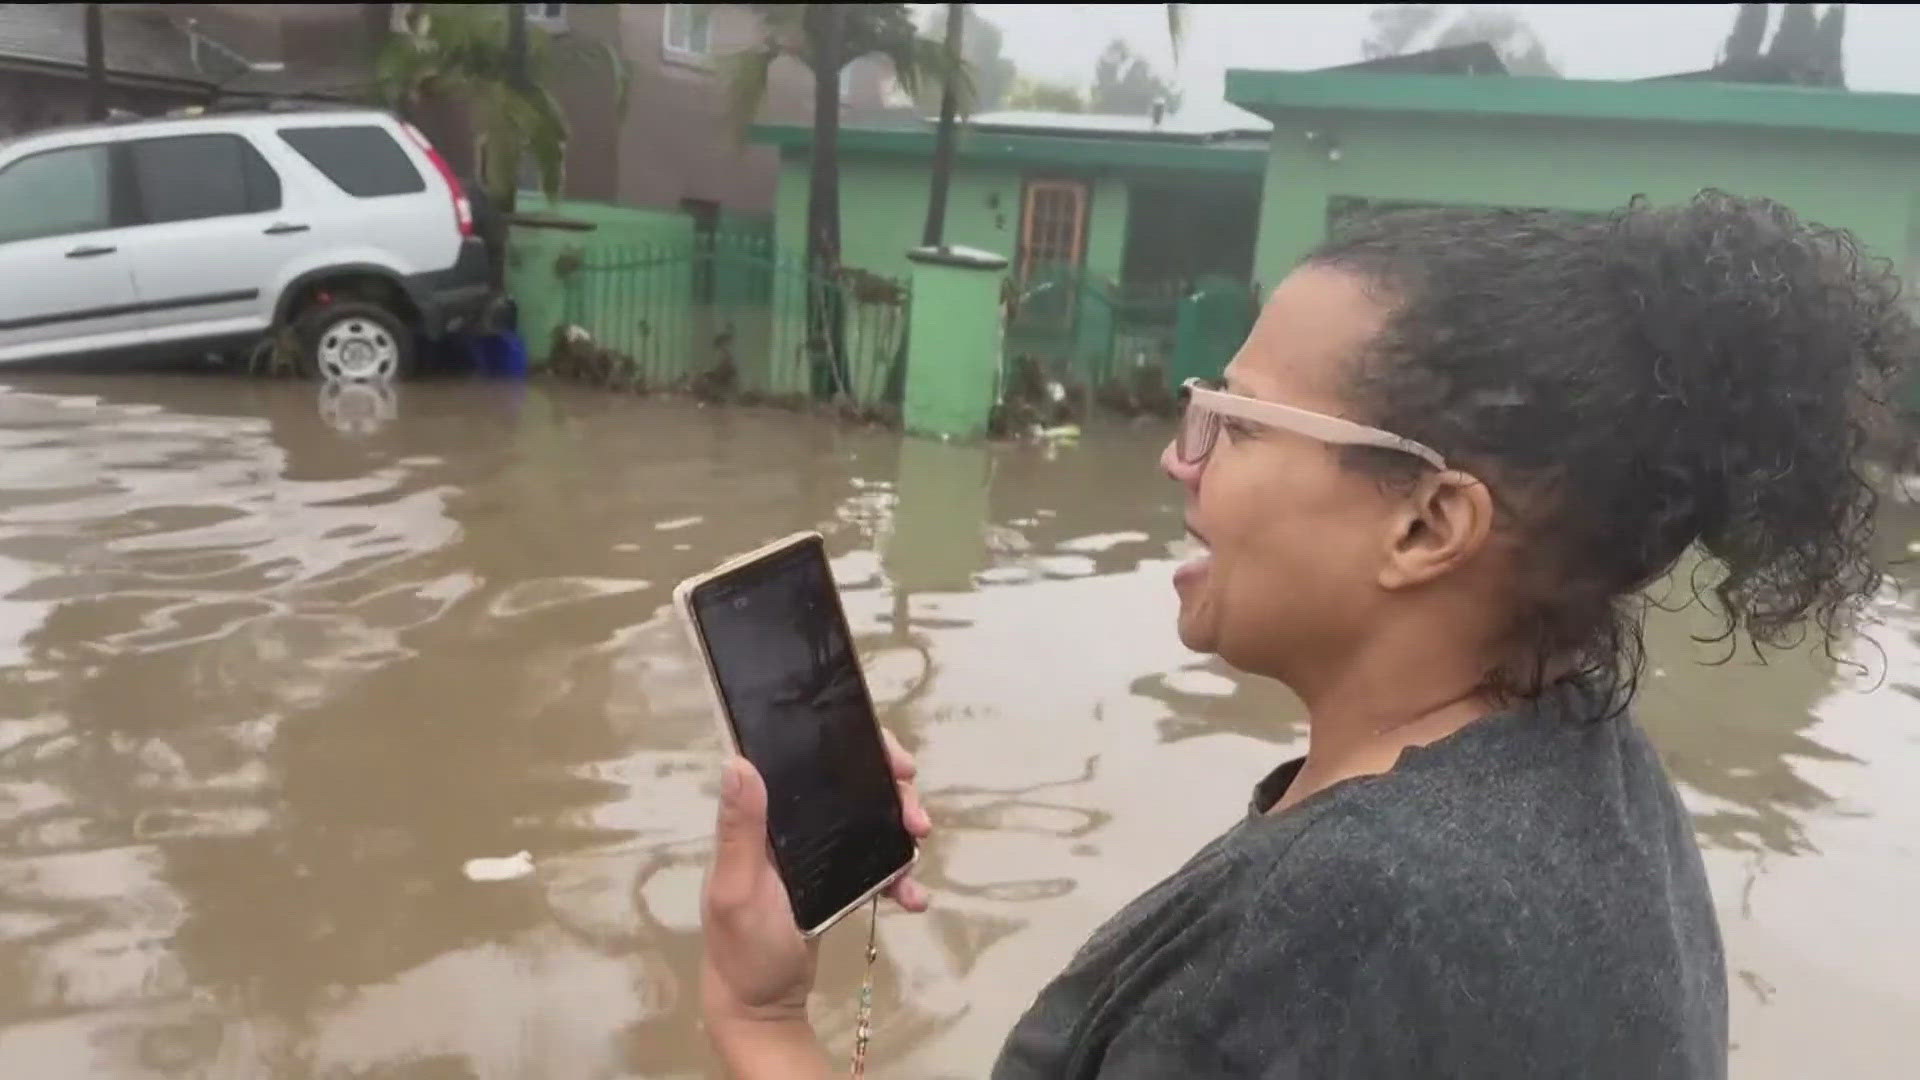 When she eventually found one of her cars after the flood waters receded, it was four houses down in her neighbor’s yard.